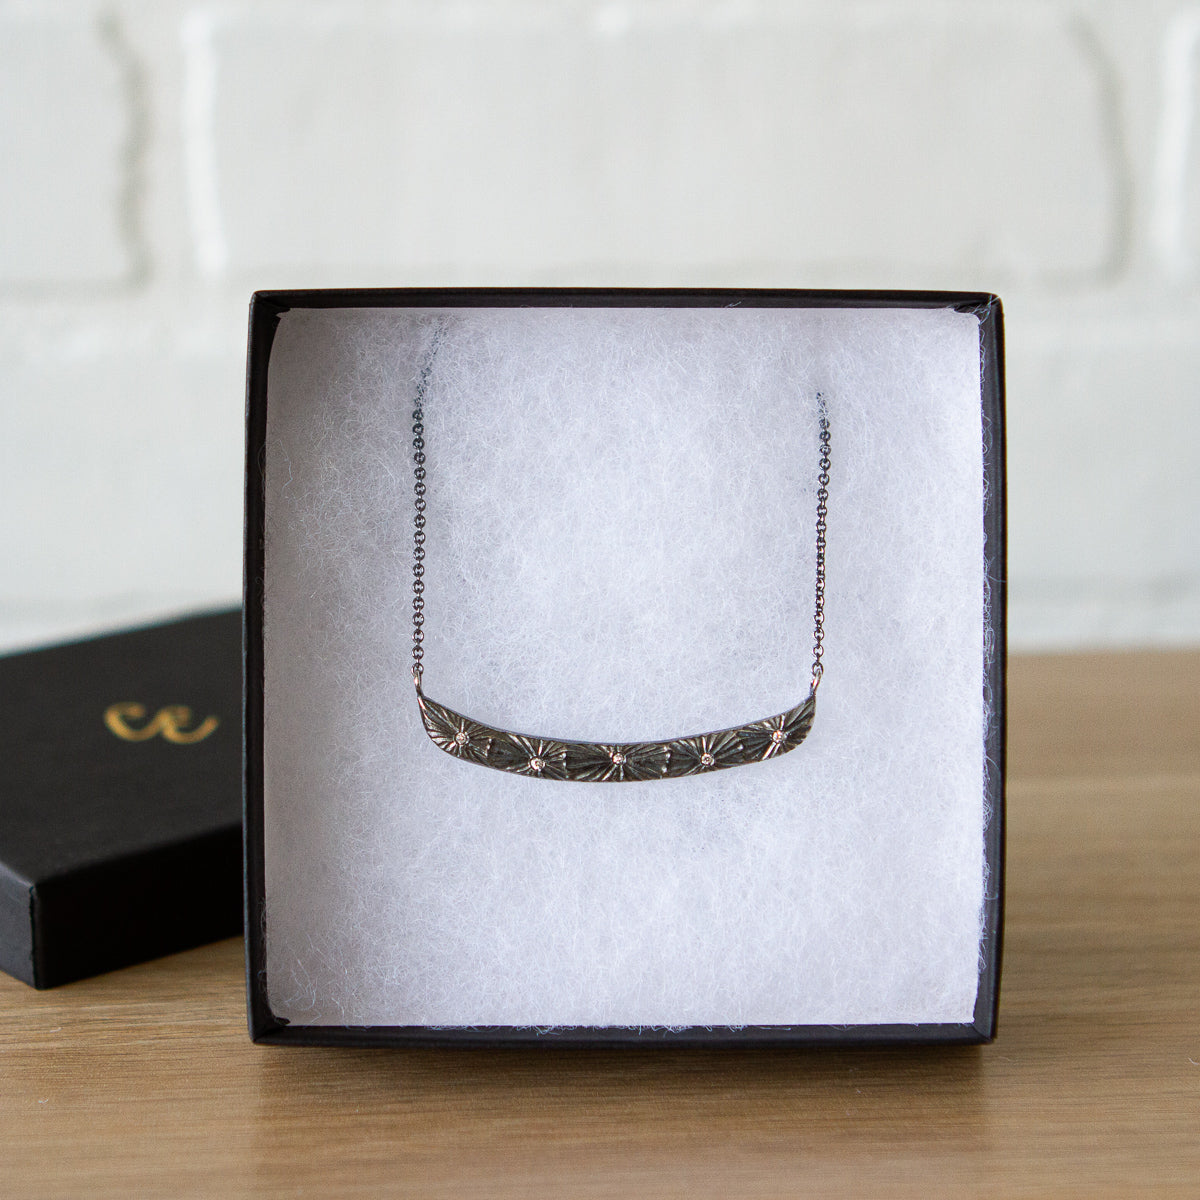 Oxidized silver bar necklace with a sunburst motif and five scattered diamonds in a gift box